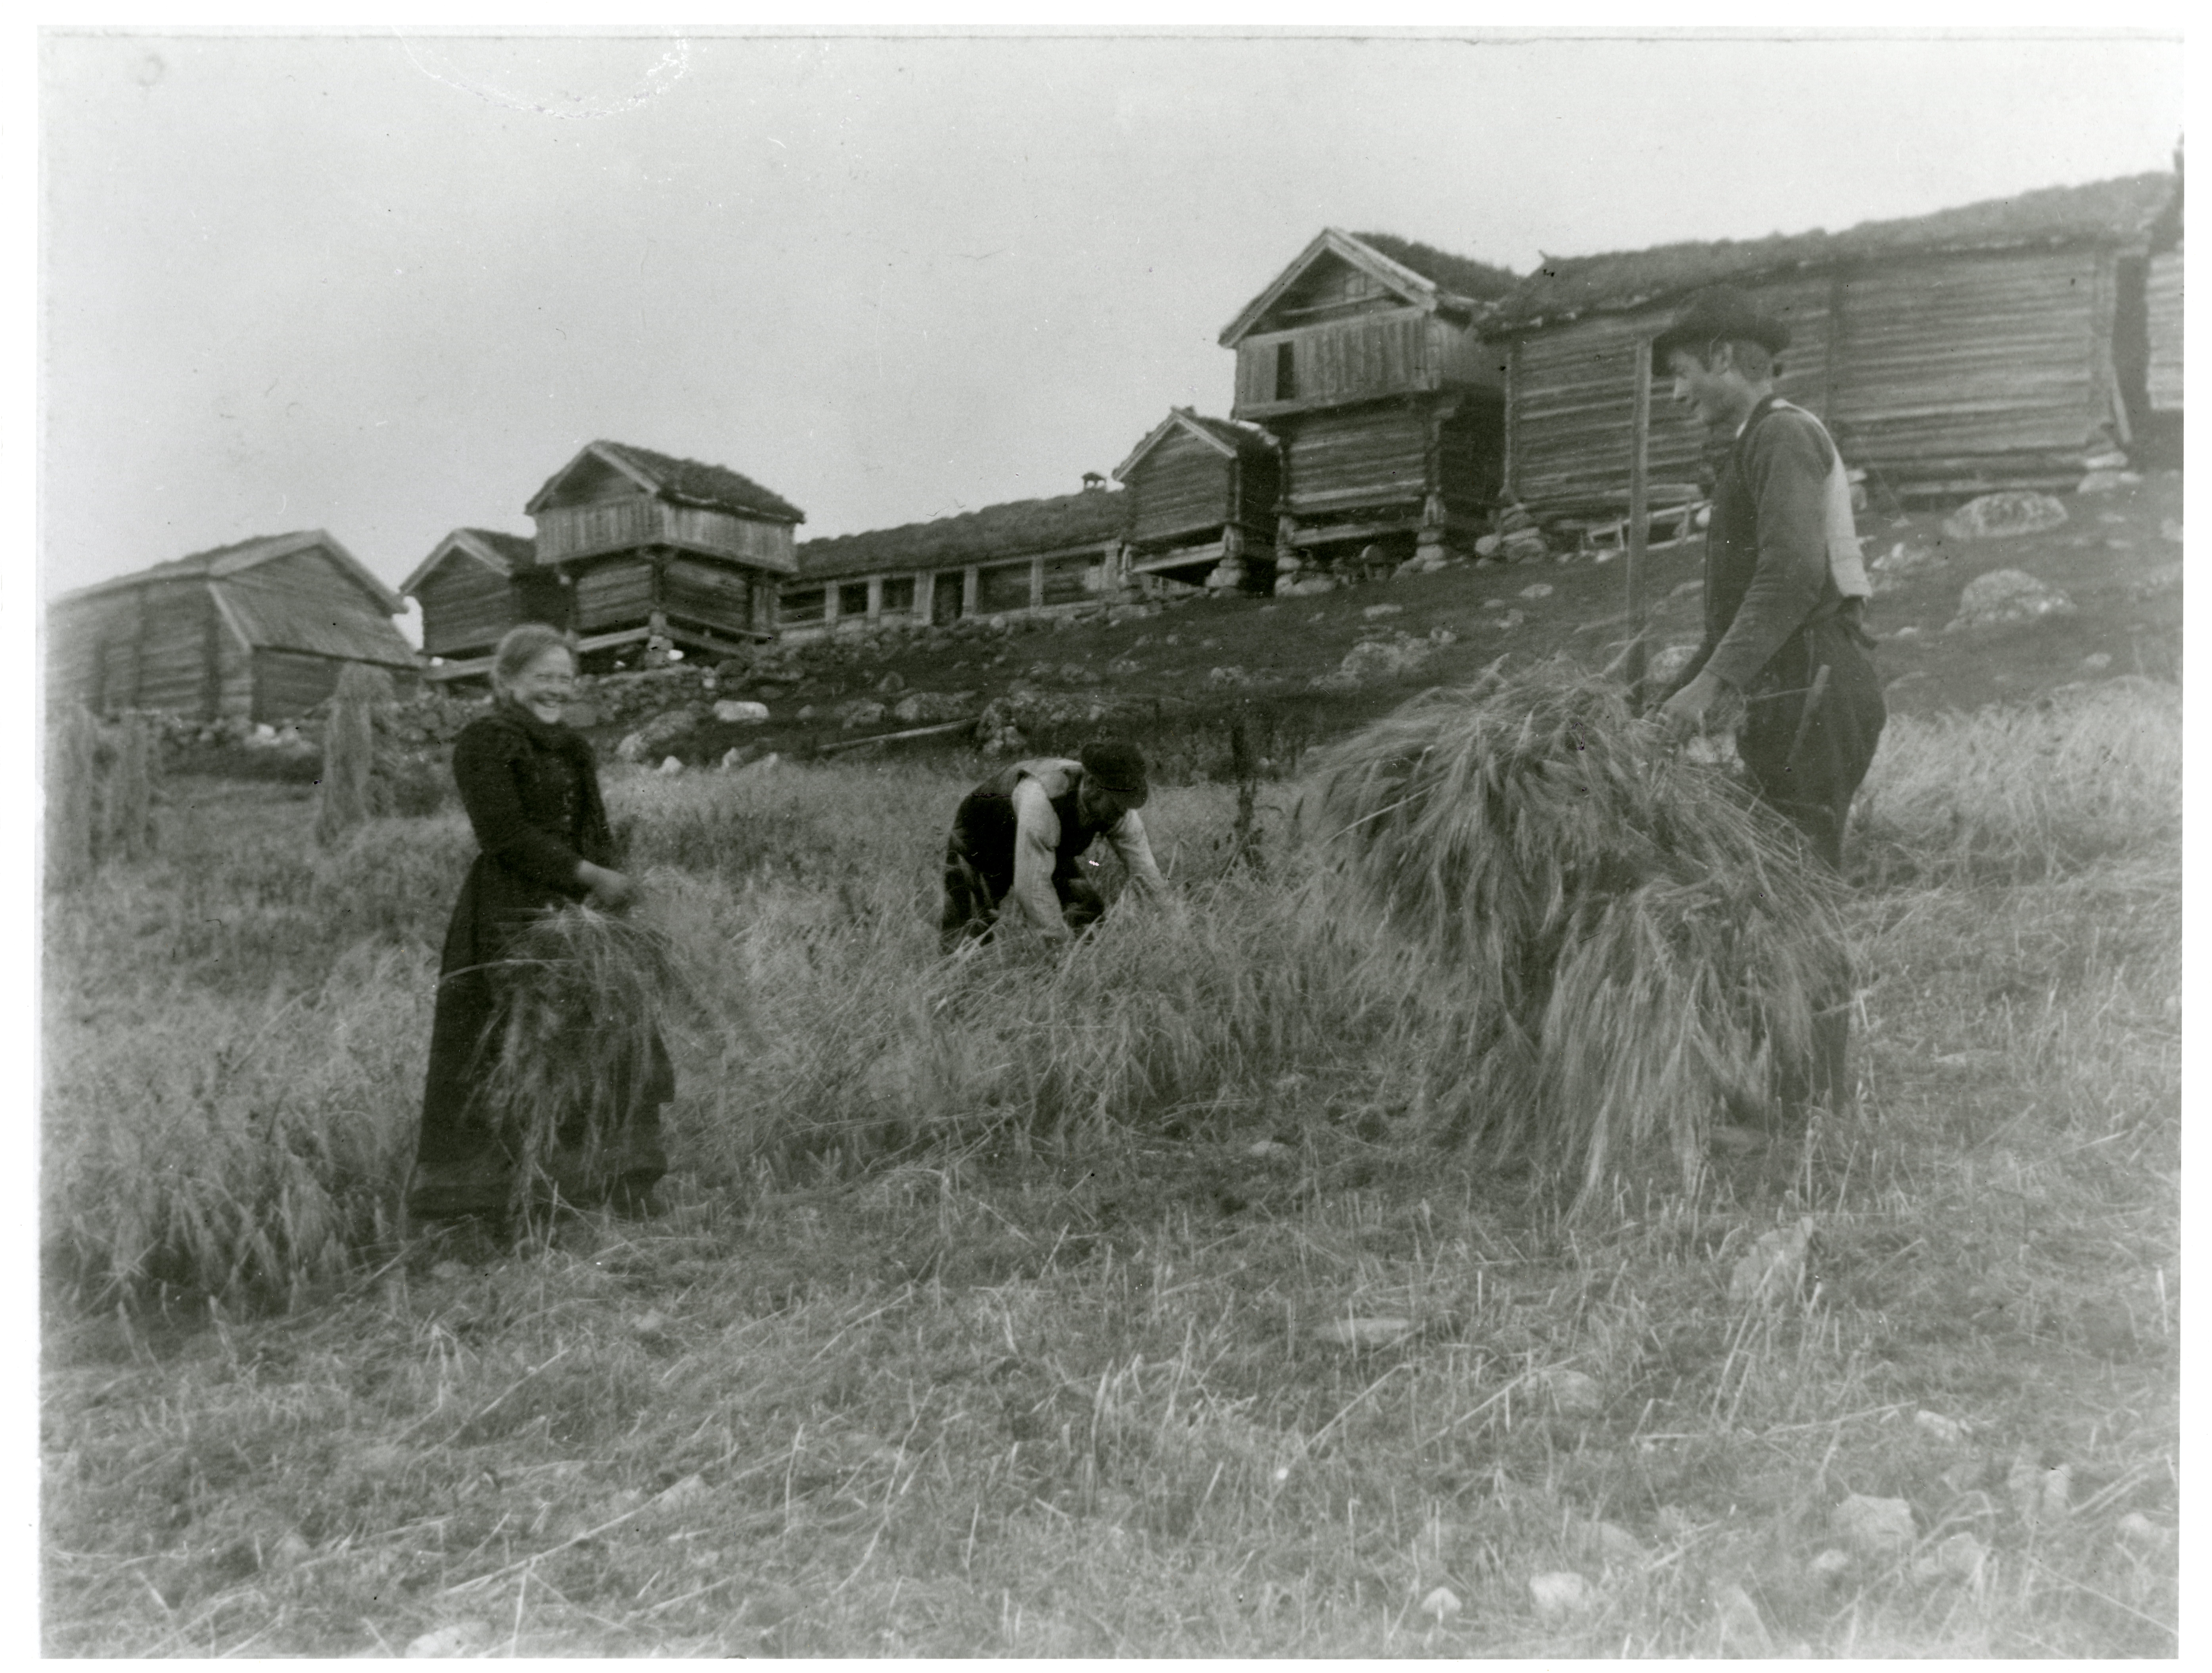 Three young adults work with hay in field.